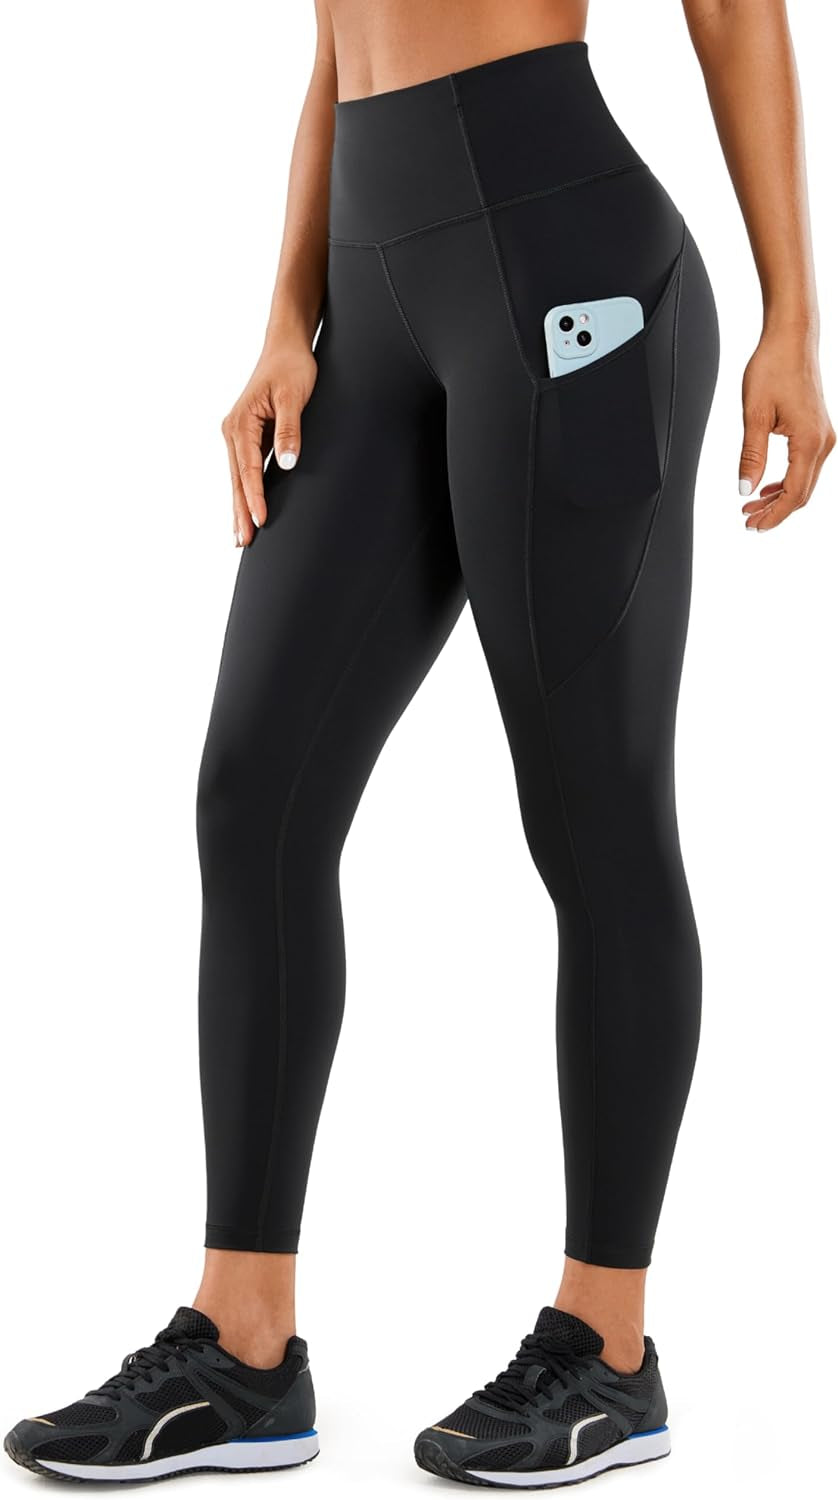 "Ultimate Performance Yoga Leggings: Women'S High-Waisted Workout Pants with Side Pockets - Experience Supreme Comfort and Support!"